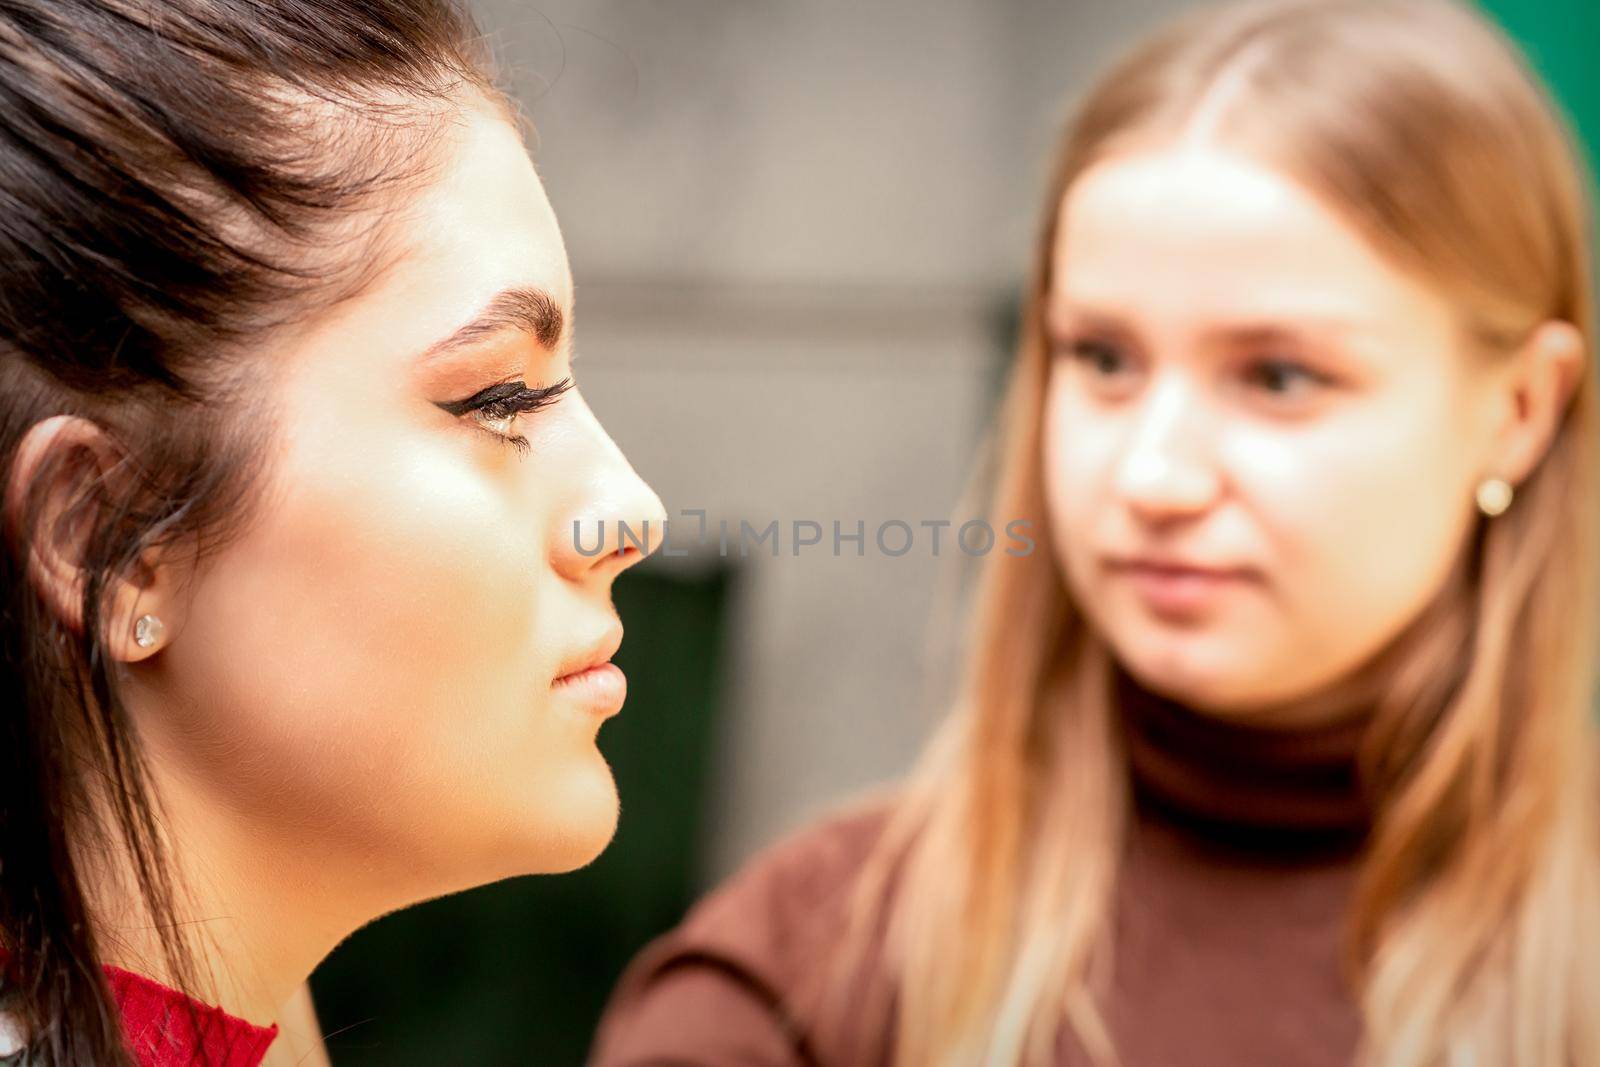 Profile portrait of the beautiful female model with long hair and makeup with a makeup artist in a beauty salon